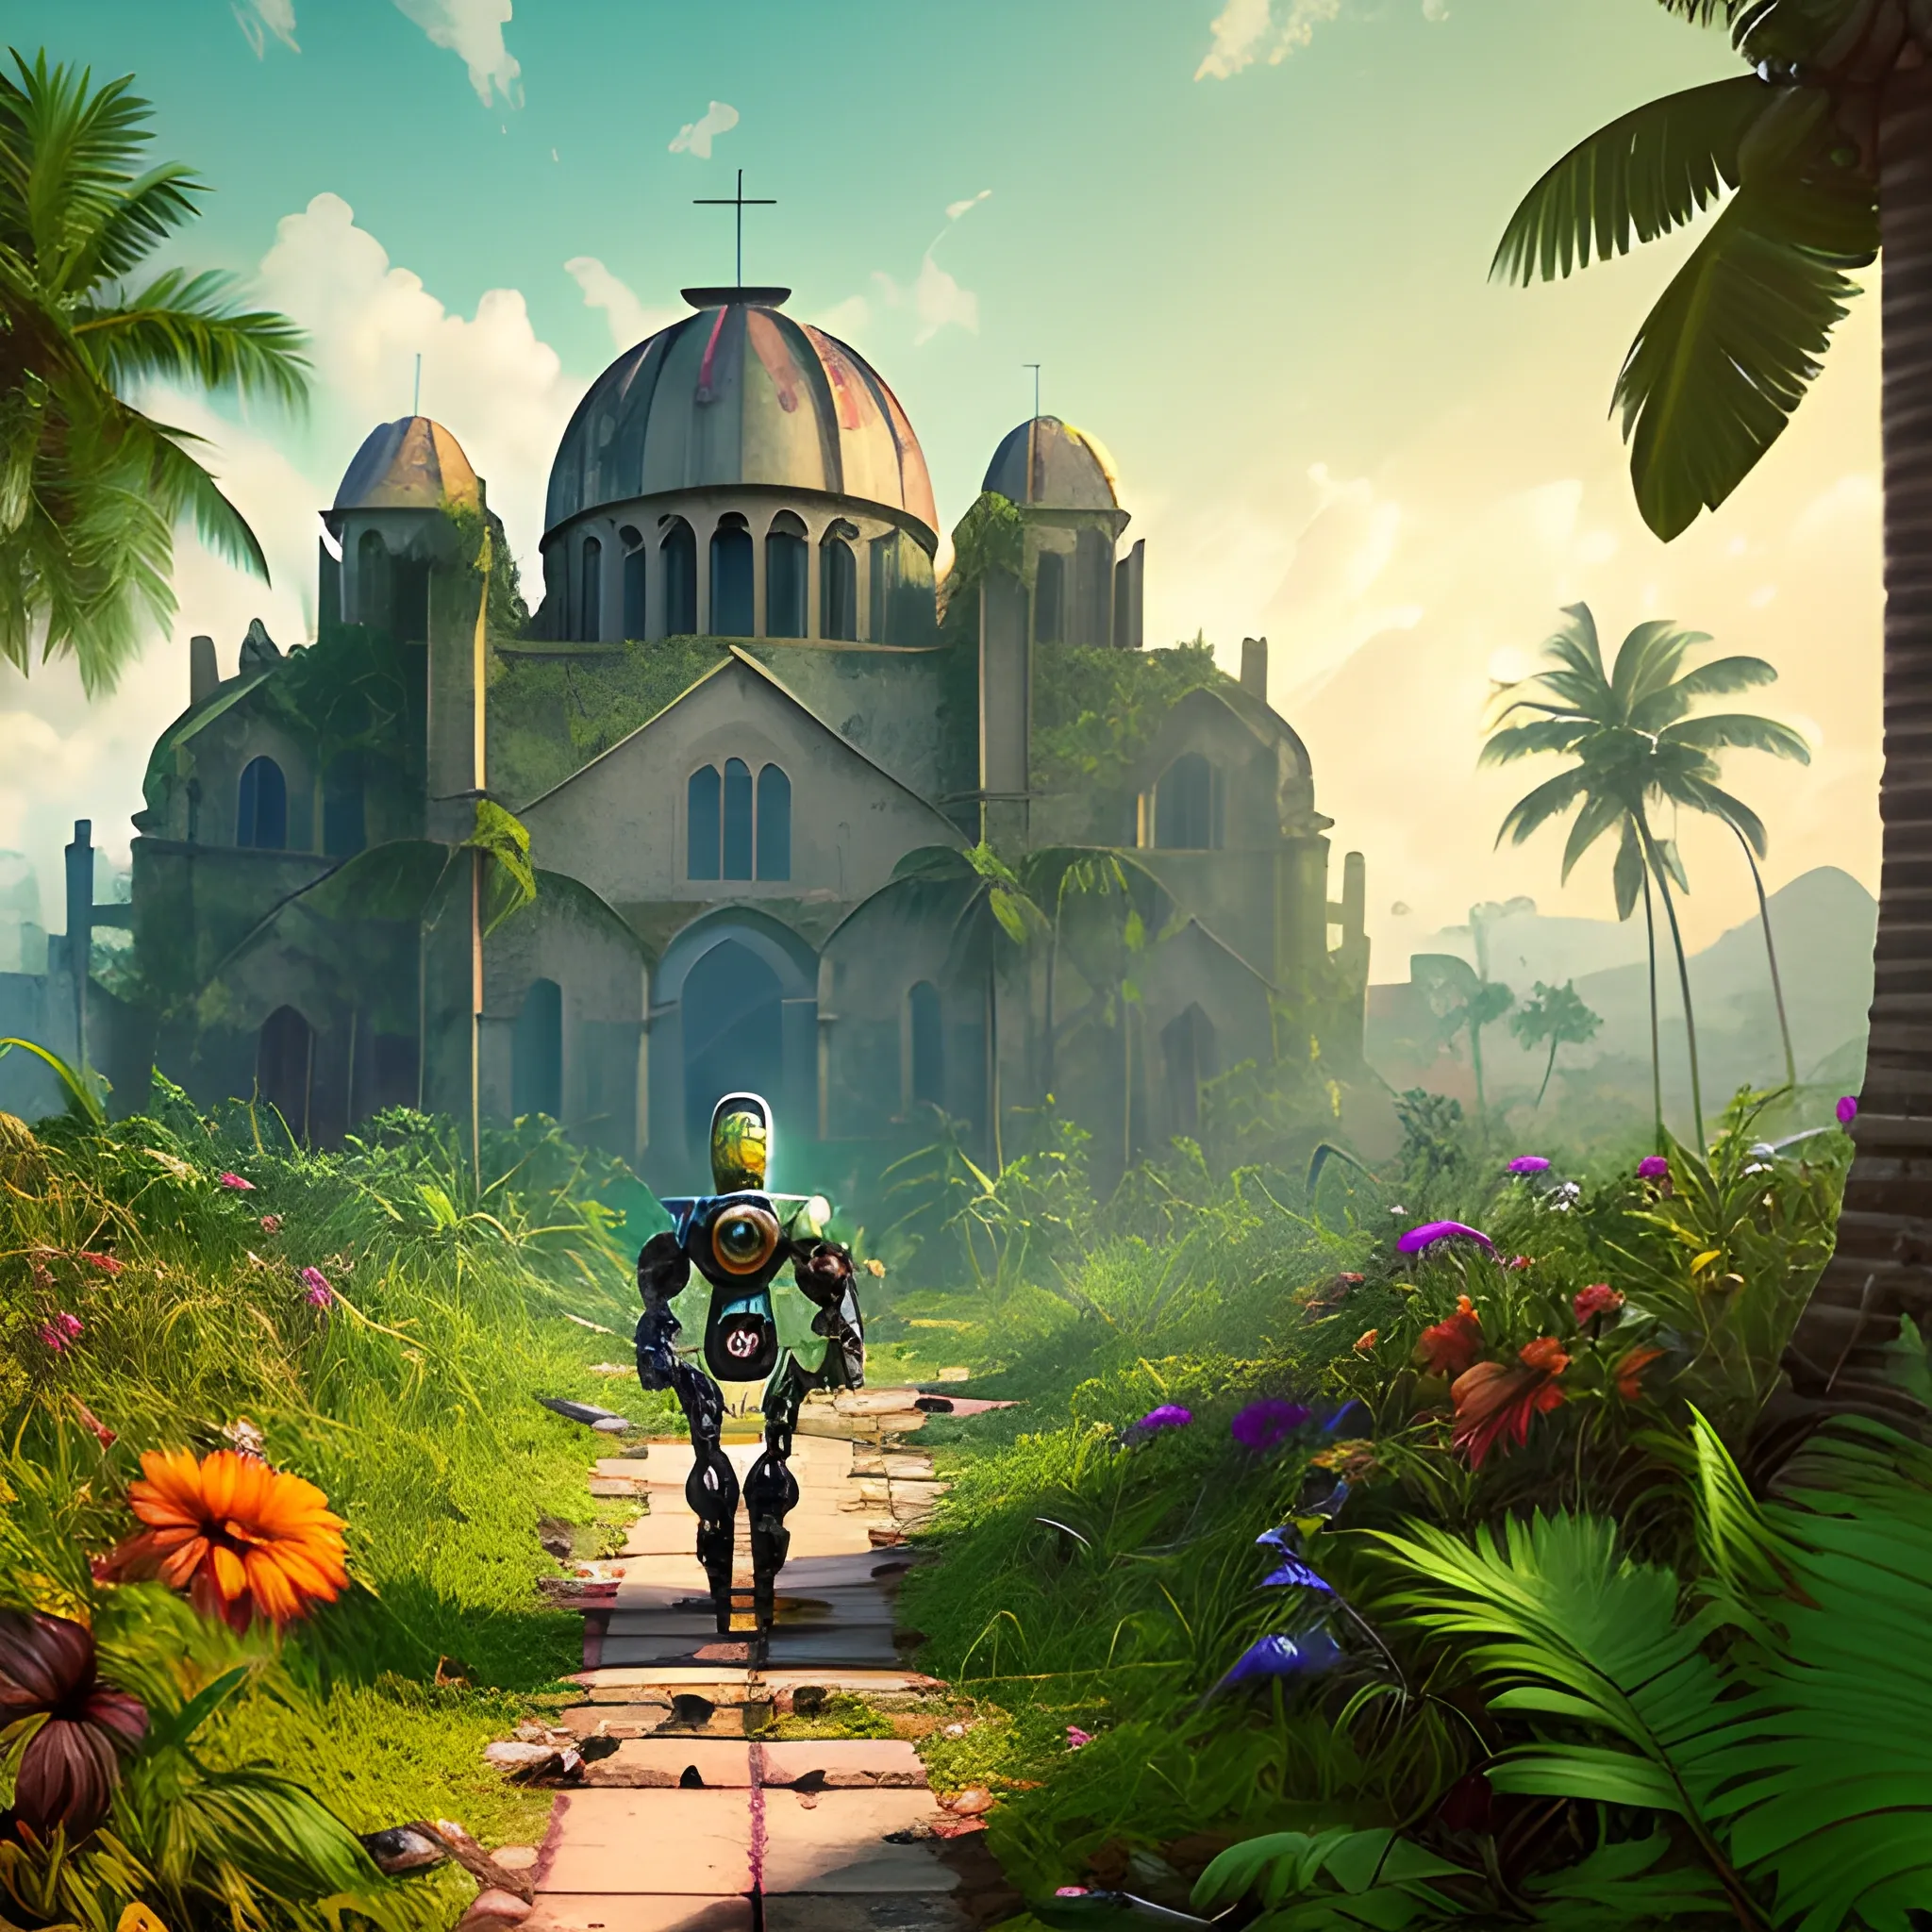 abandoned ruined city invaded by lush vegetation, very colorful flowers, a ruined cathedral under tropical vegetation, a very sophisticated robot walking towards the horizon of a setting sun, 3D